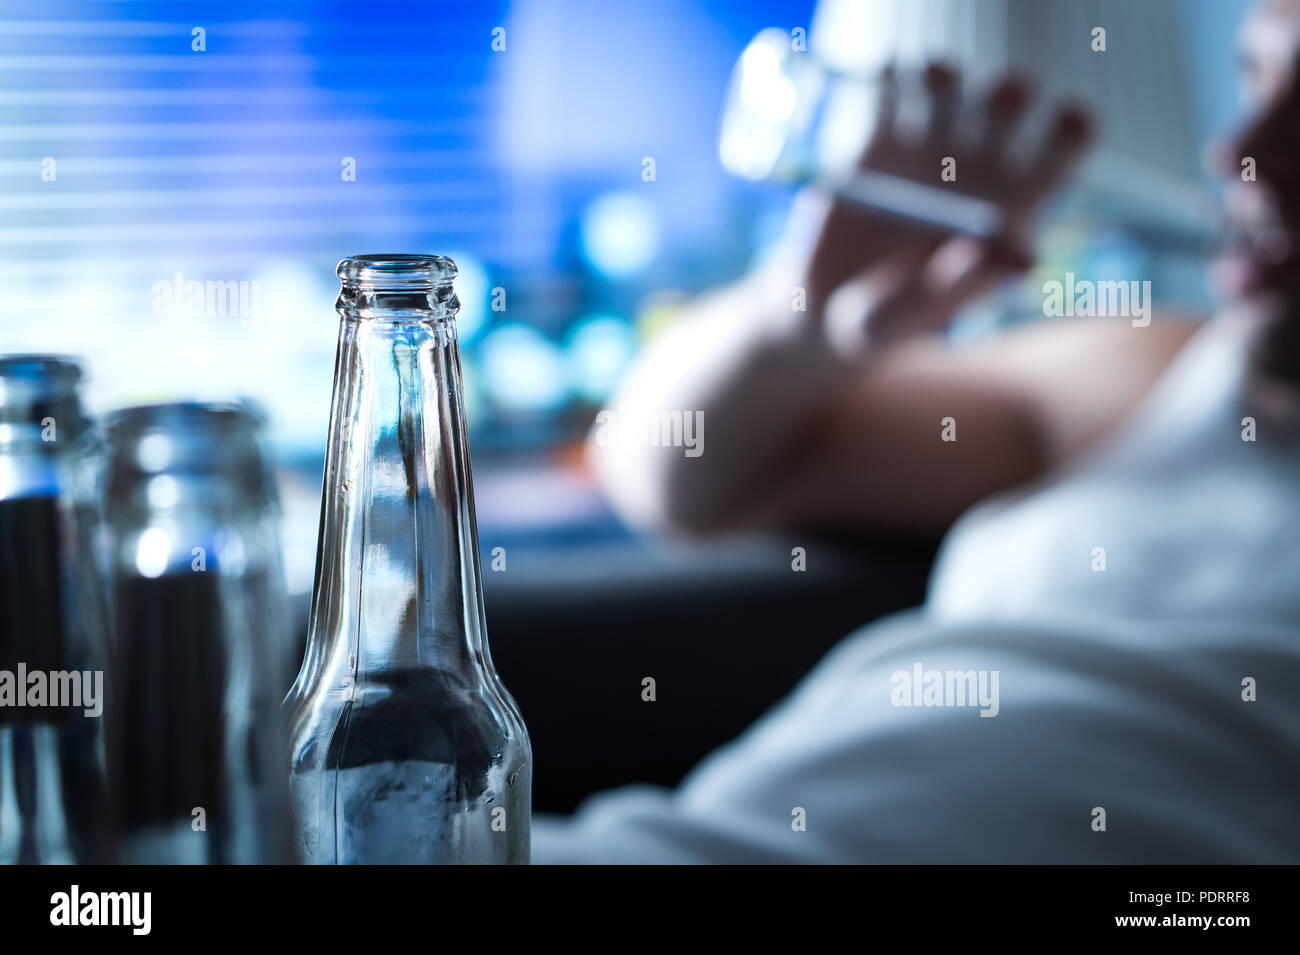 Anynomous alcoholic taking sip of beer. Home full of empty bottles. Alcoholism and drinking problem concept. Man sipping alcohol late at night. Stock Photo